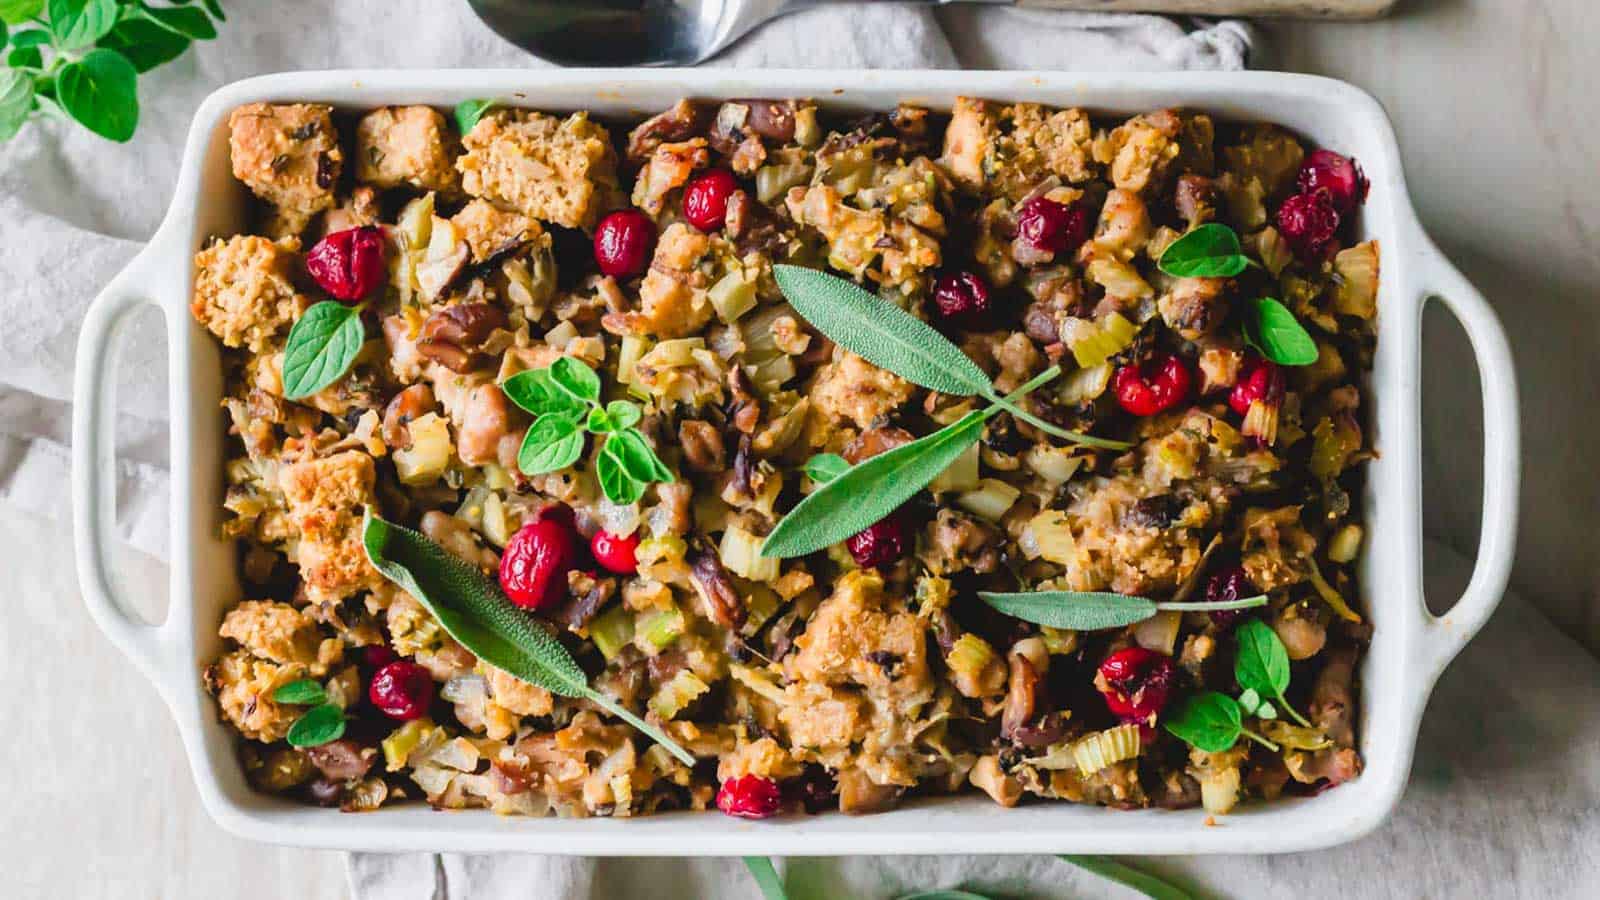 Cornbread chestnut stuffing in a white baking dish garnished with fresh sage leaves.